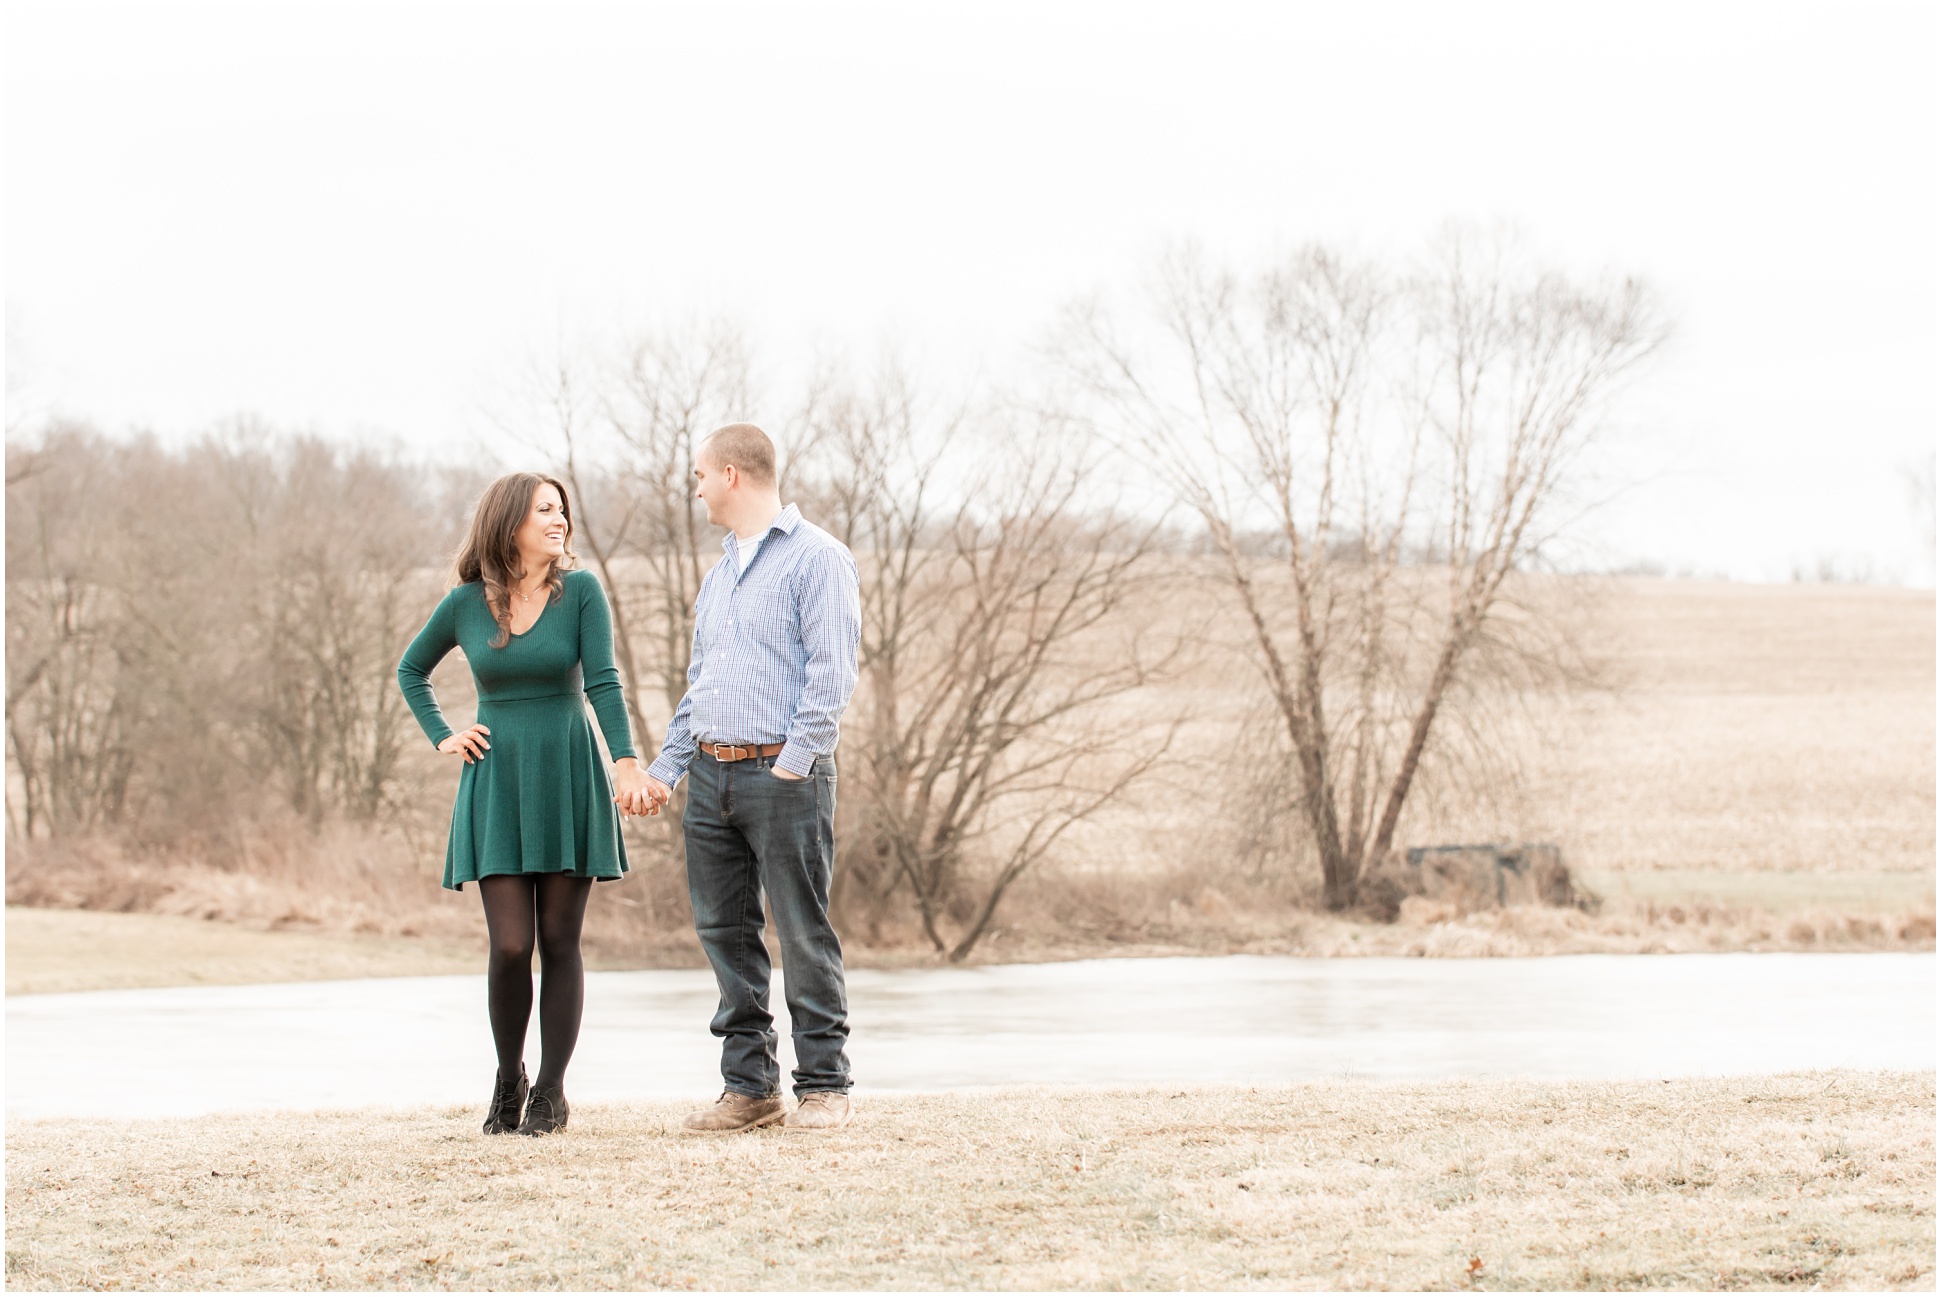 Valerie and Ryan standing by the pond on a cold winter day